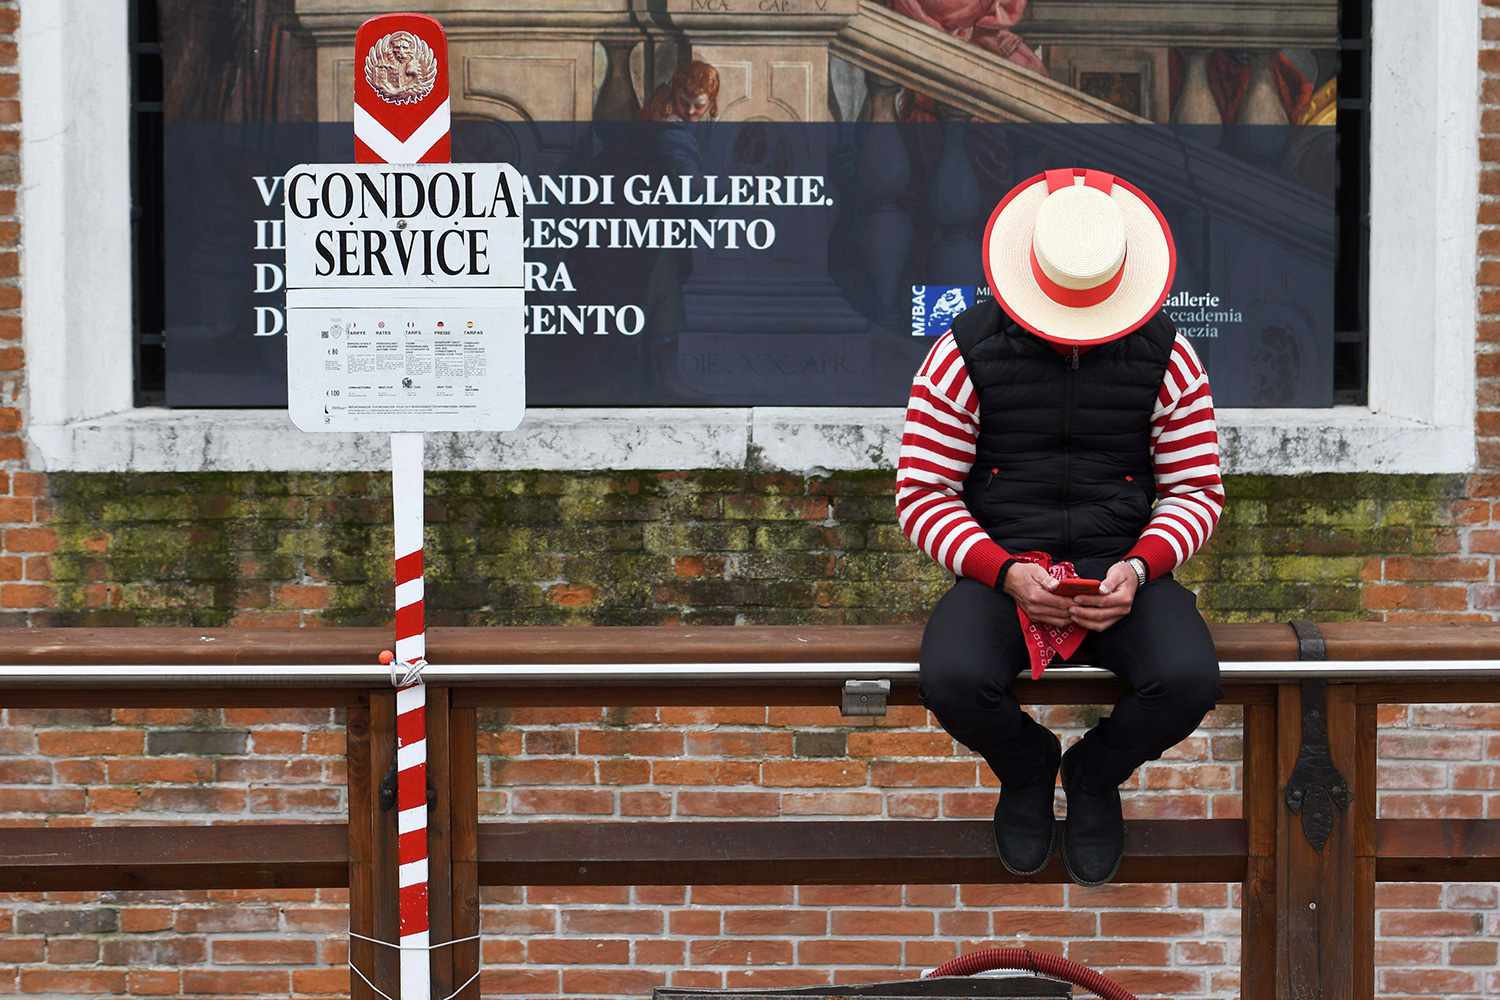 A Gondoliere checks his mobile phone while waiting for tourists in Venice on March 5, 2020